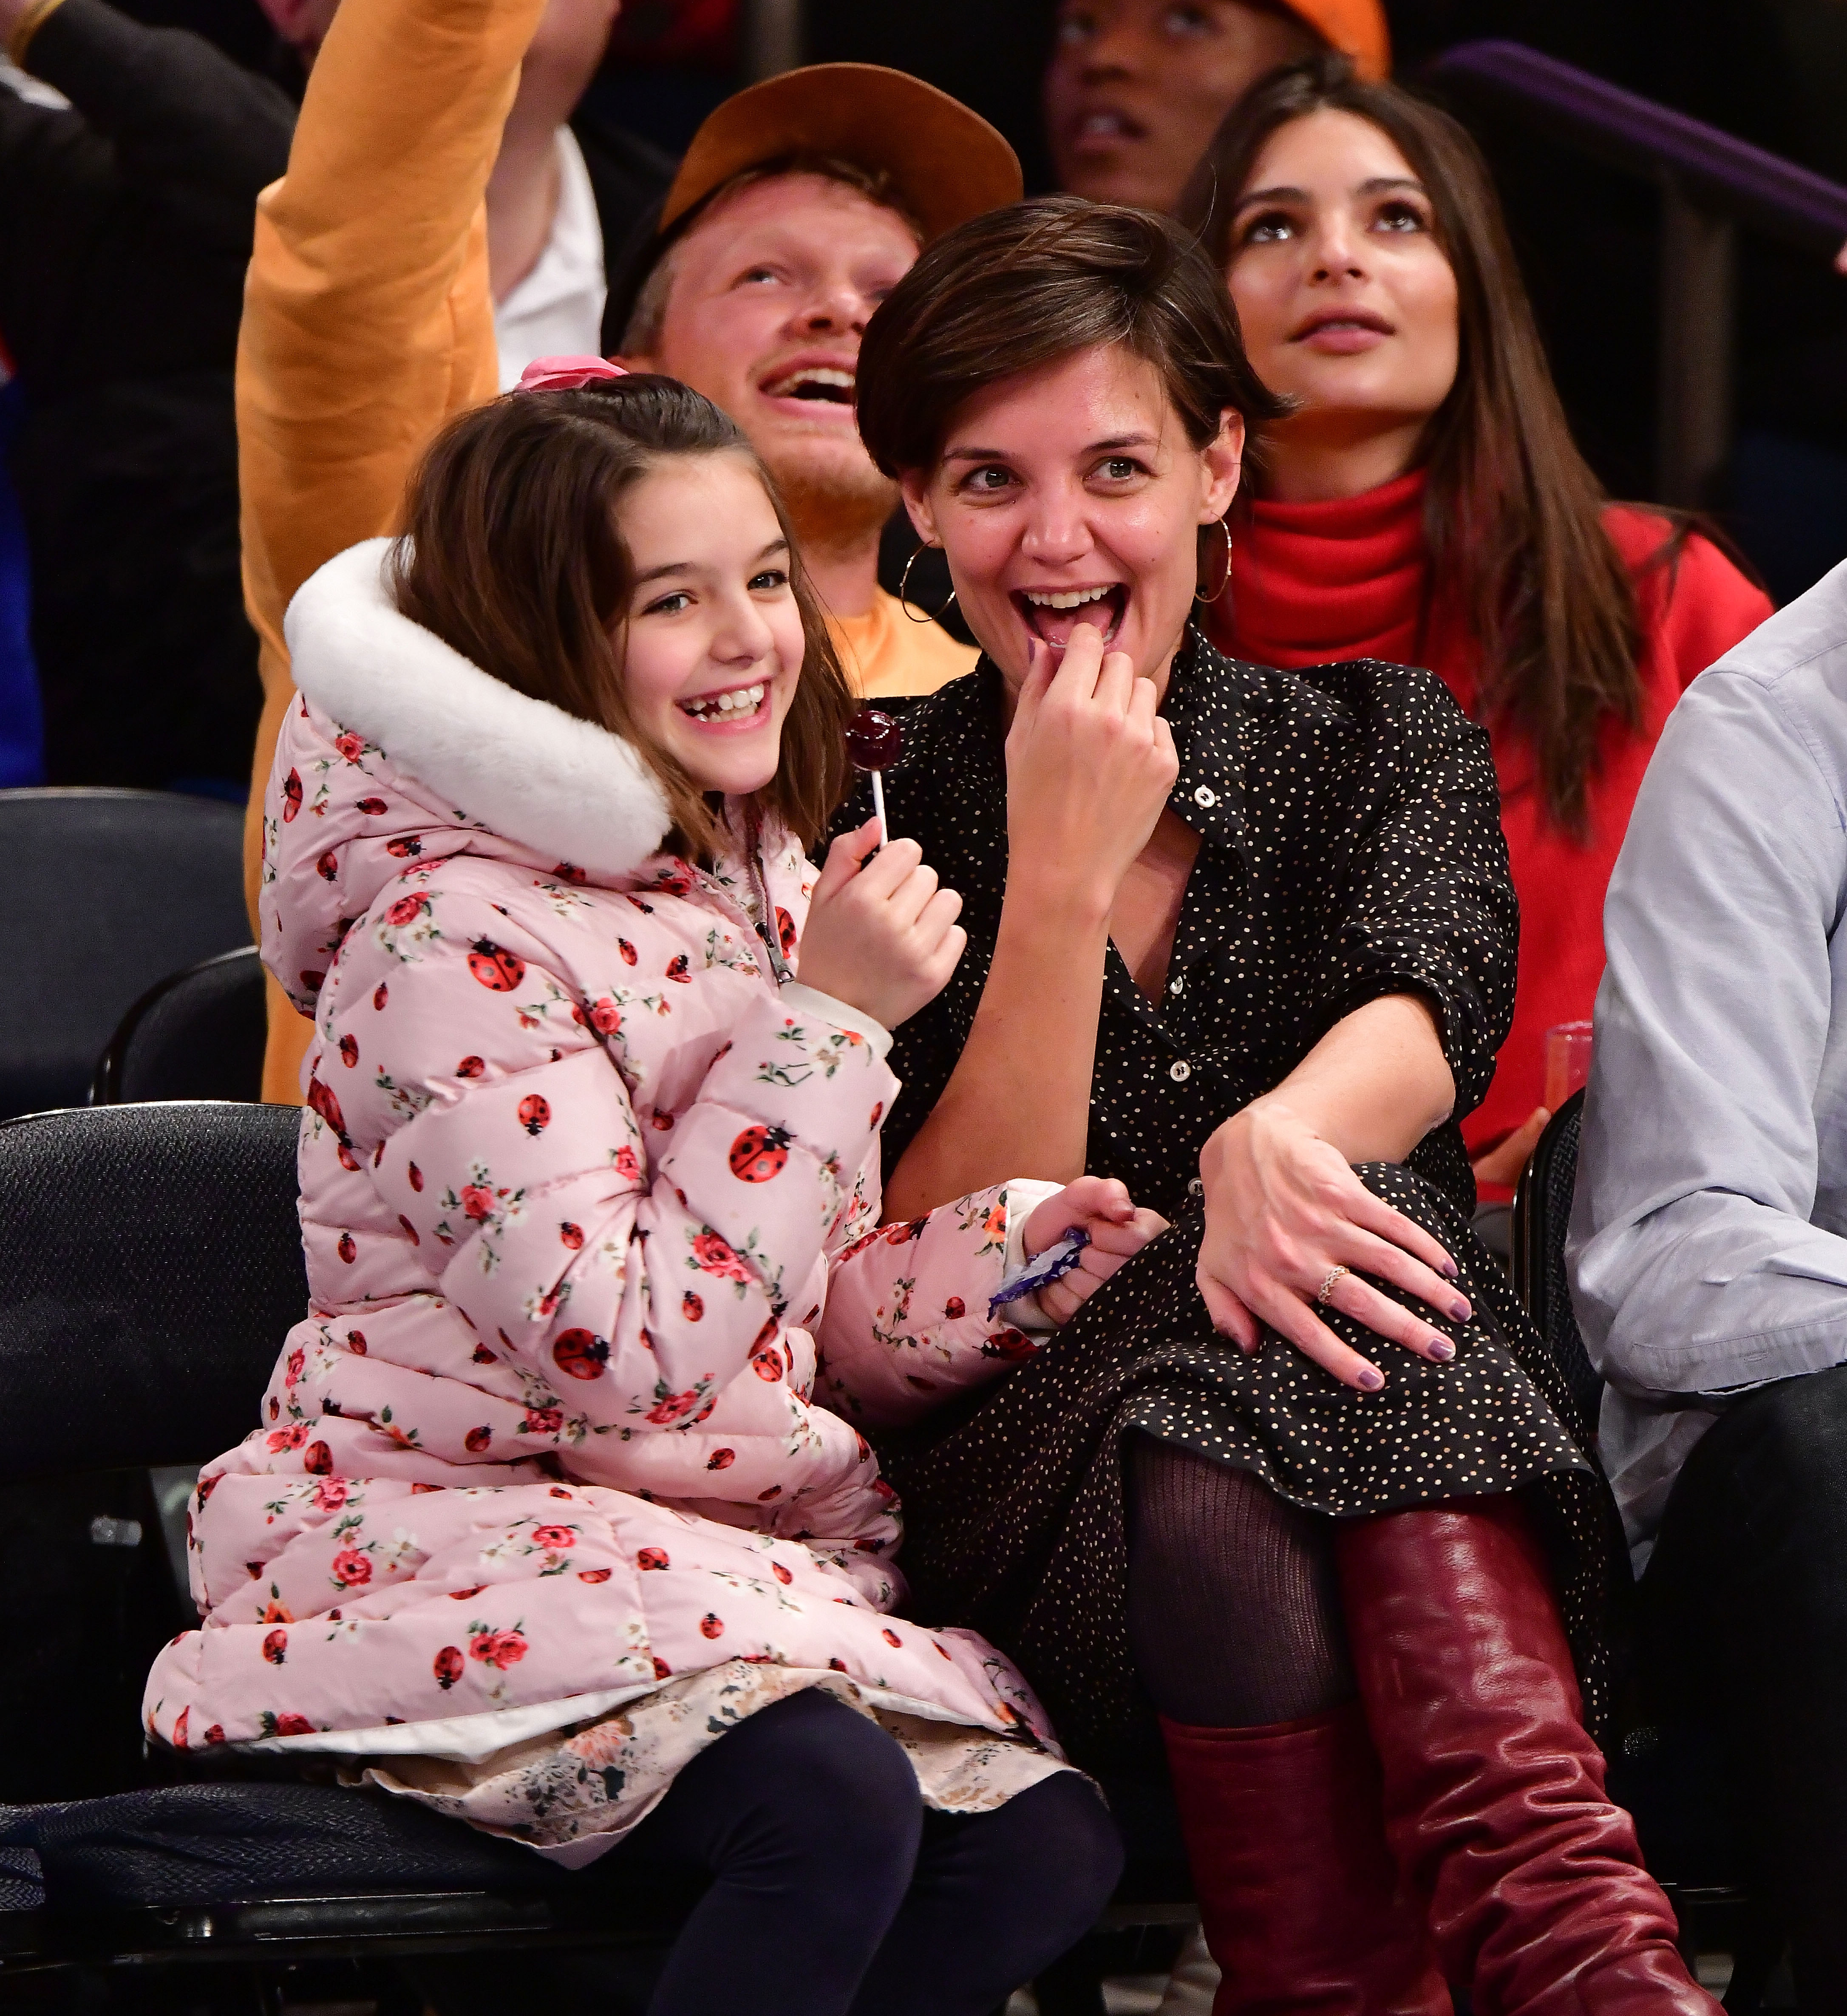 Suri Cruise and Katie Holmes attend the Oklahoma City Thunder Vs New York Knicks game at Madison Square Garden on December 16, 2017 in New York City. | Source: Getty Images